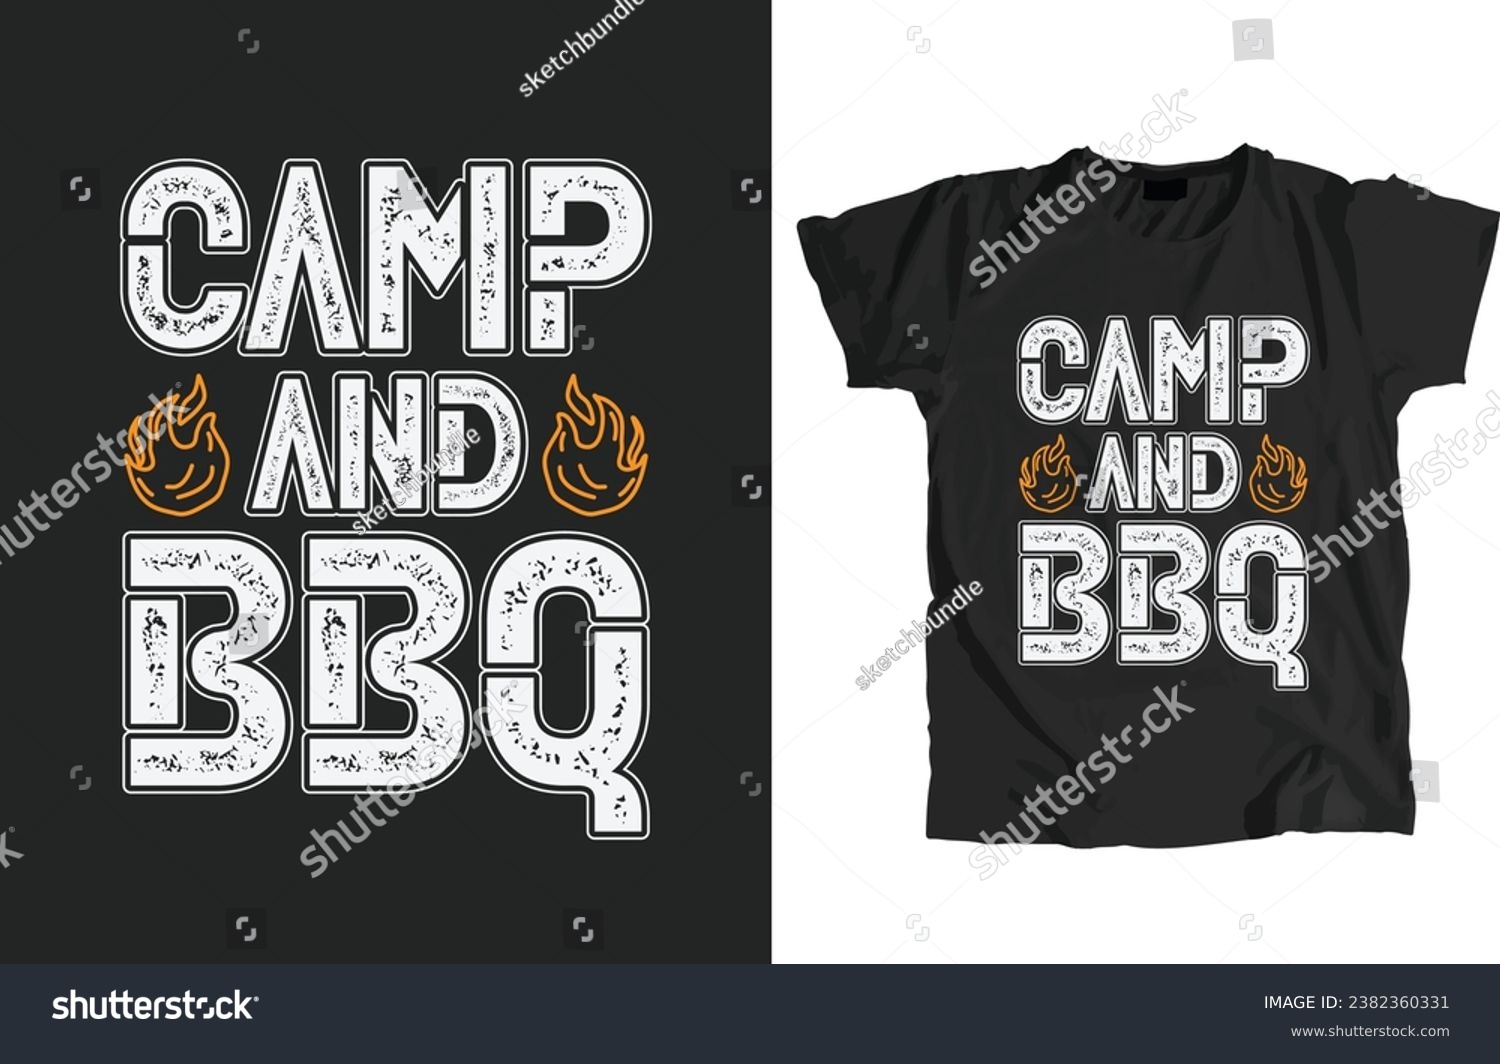 SVG of BBQ Grill Design File. That allow to print instantly Or Edit to customize for your items such as t-shirt, Hoodie, Mug, Pillow, Decal, Phone Case, Tote Bag, Mobile Popsocket etc. svg